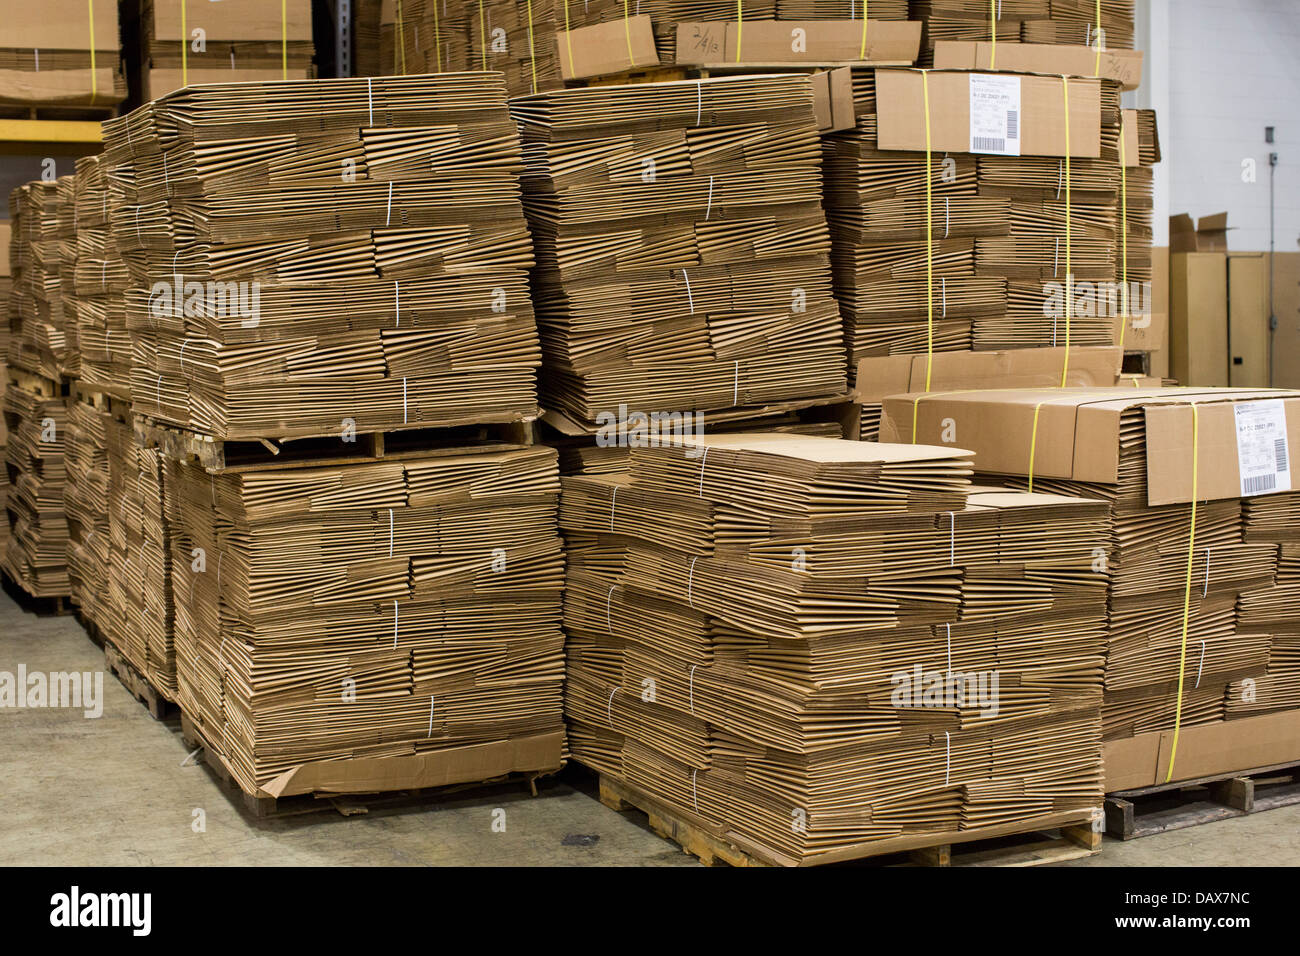 An industrial warehouse full of cardboard boxes on shelving.  Stock Photo